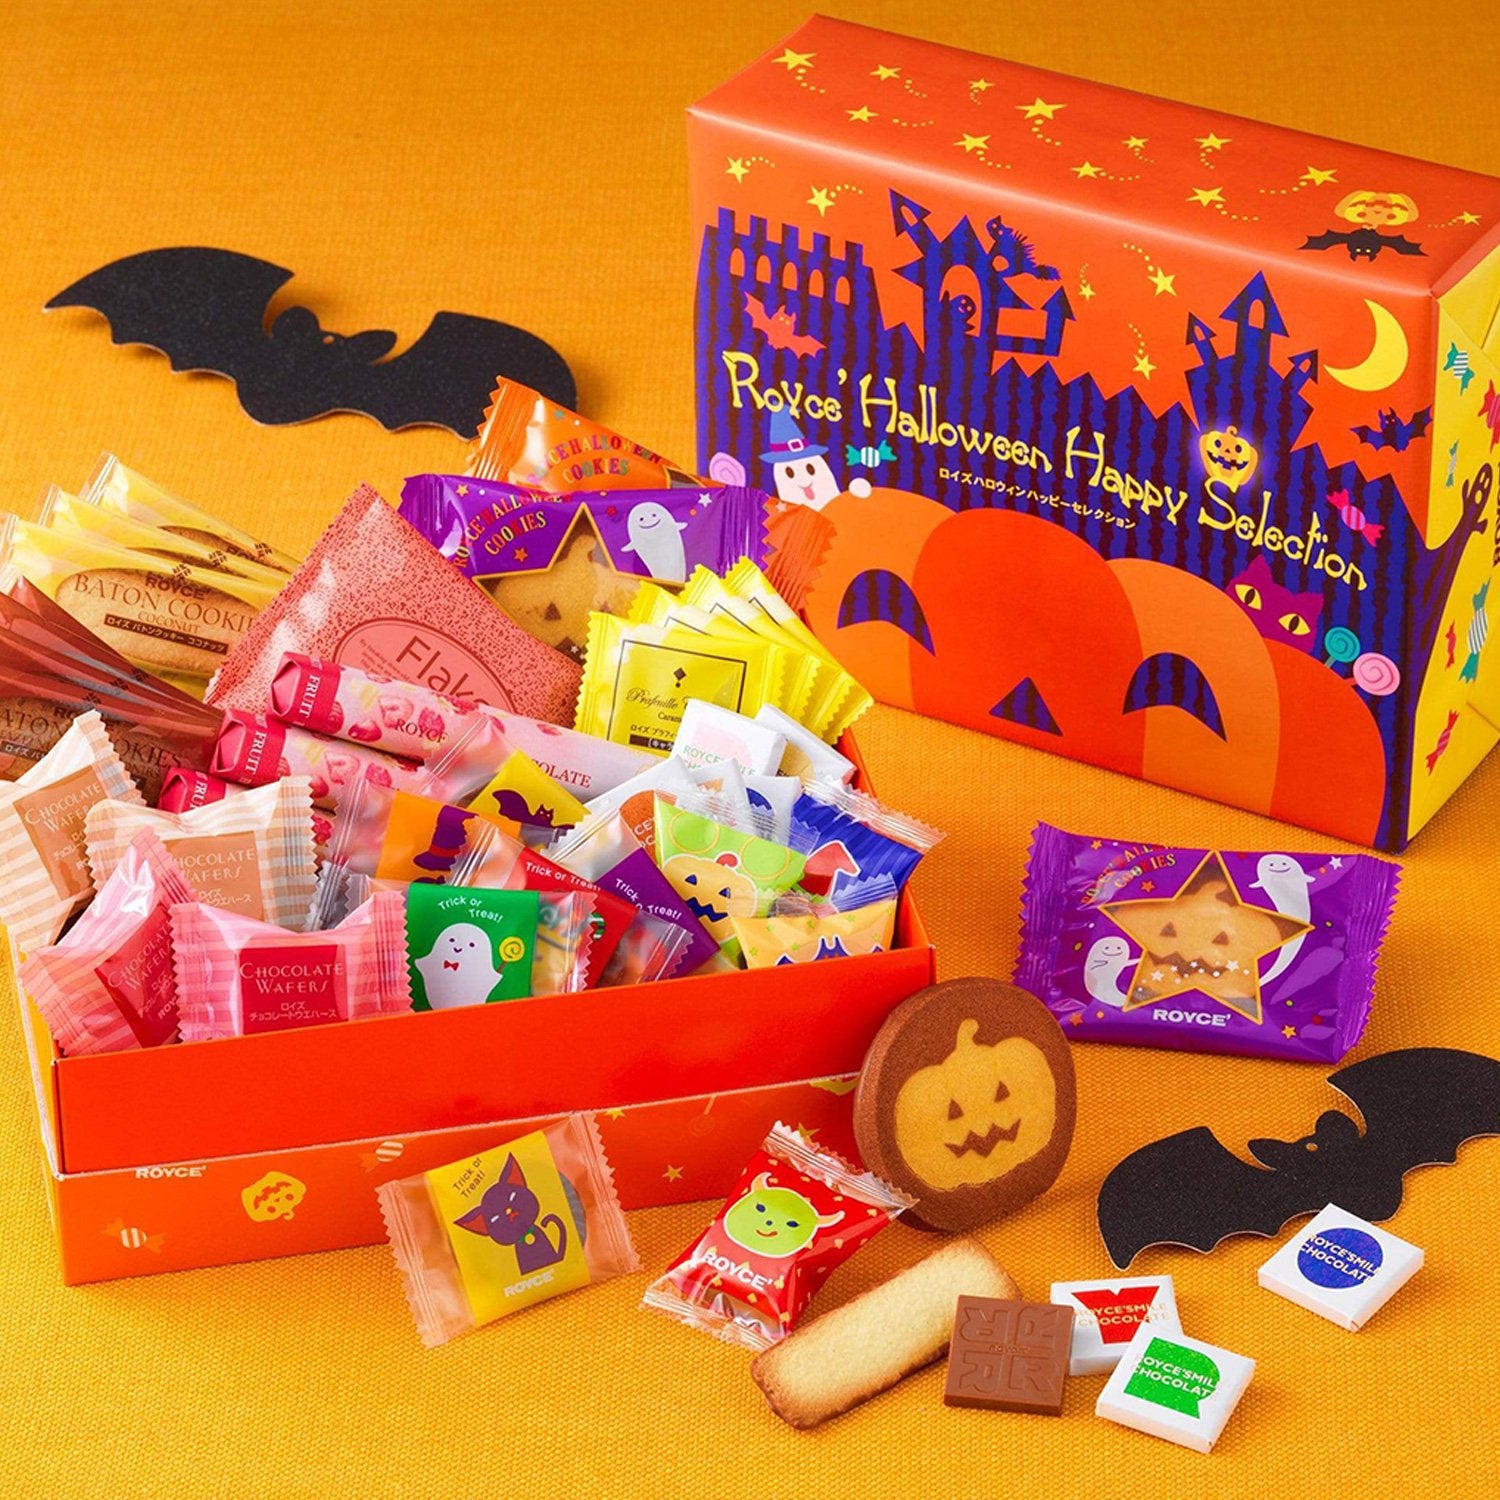 Image shows an orange box on the right with illustrations of ghosts, animals, stars, and pumpkins. Text says ROYCE' Halloween Happy Selection. Box on the left shows individually-wrapped chocolates in various prints and colors. Accents include bat-shaped black paper cutouts and some cookies and chocolates.